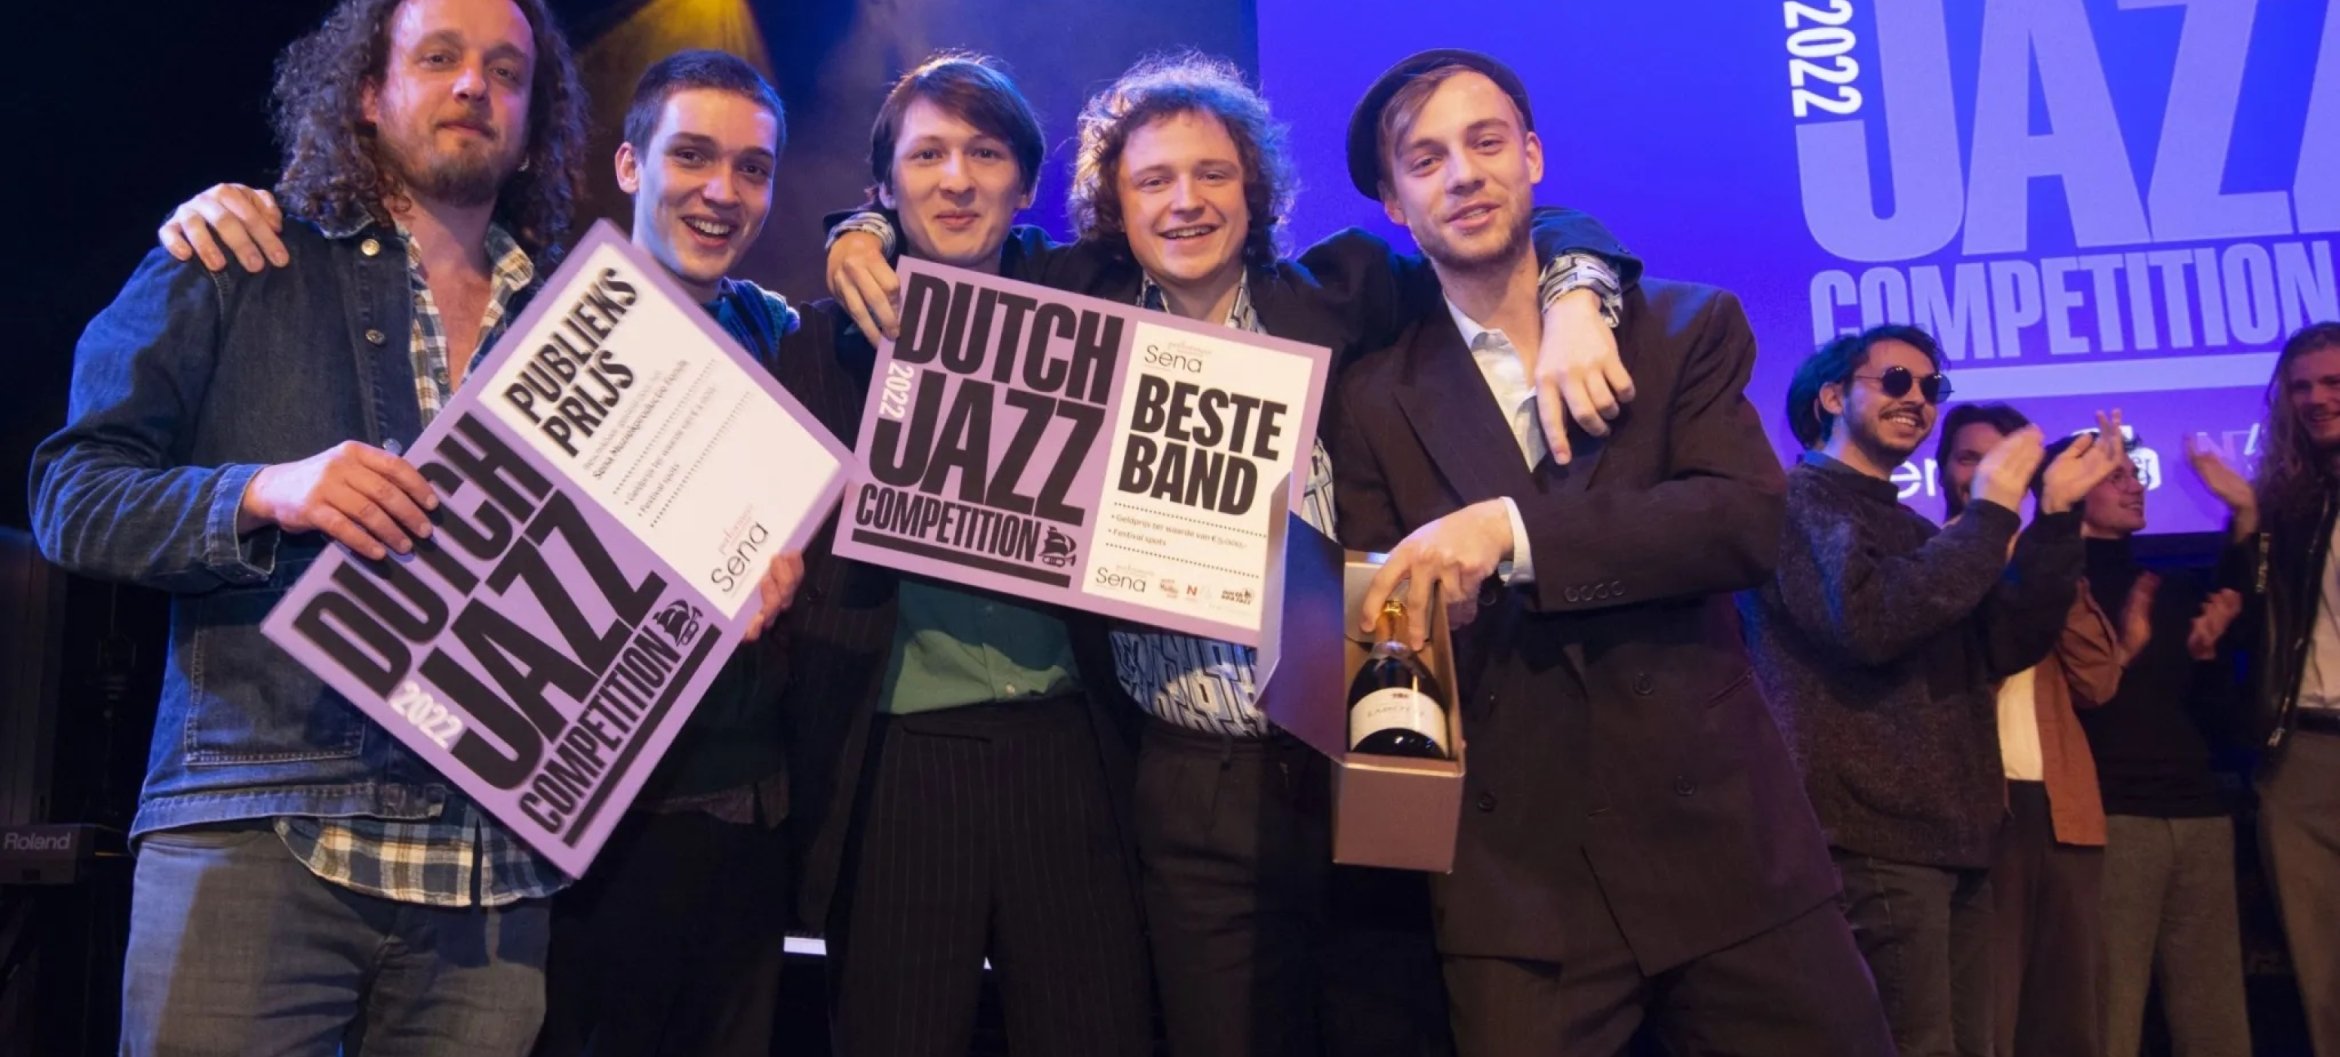 Classical Music students win prizes at Dutch Jazz Crossover Competition